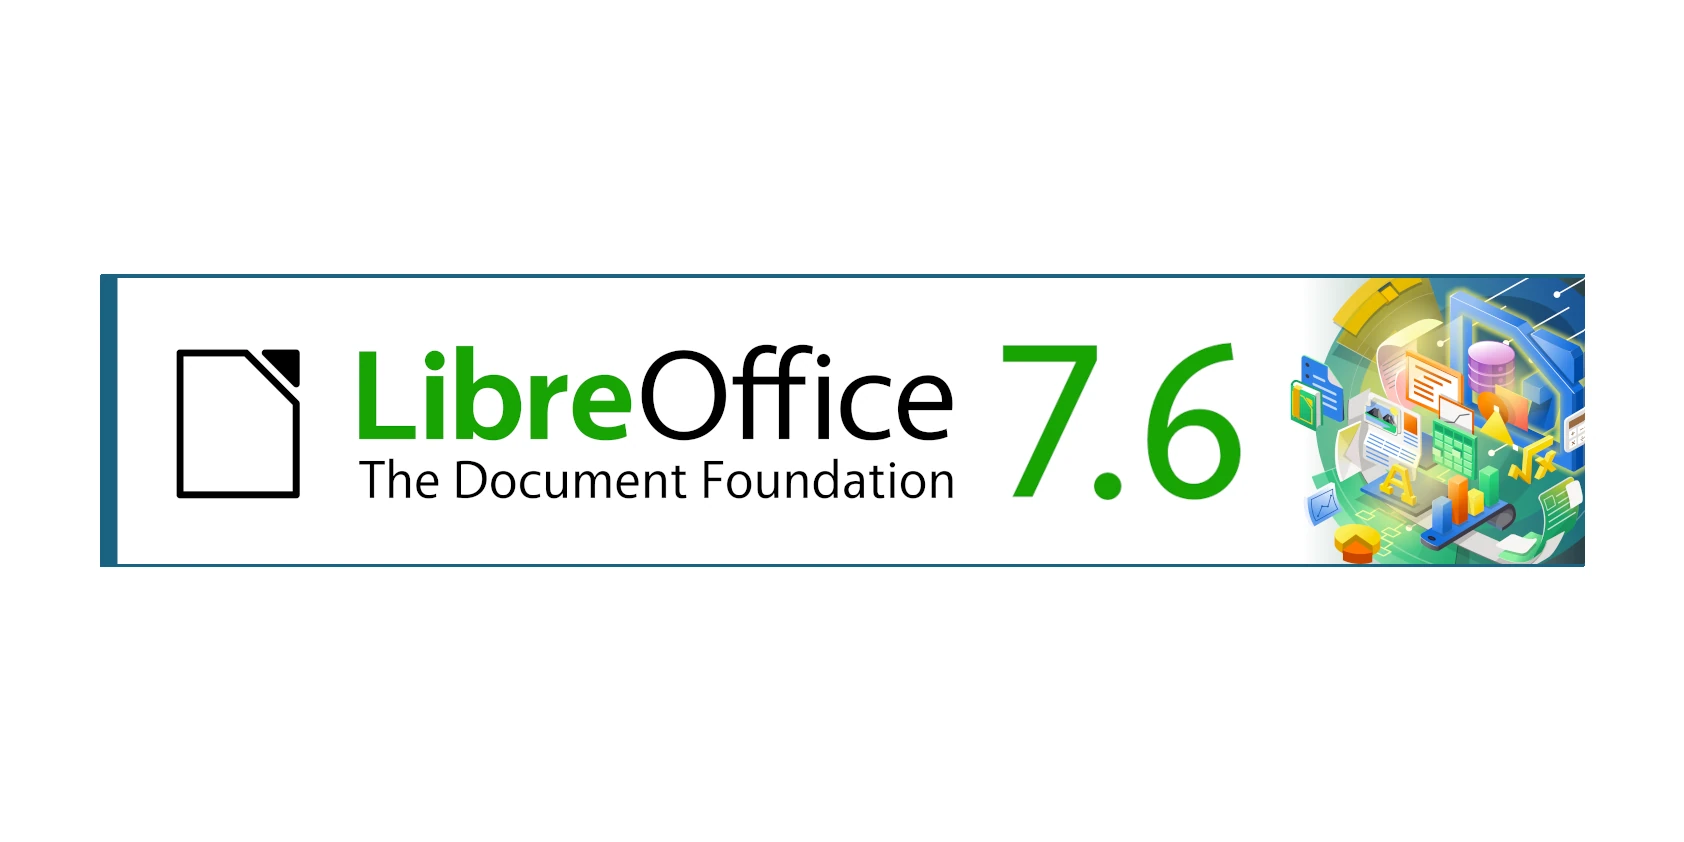 LibreOffice 7.6.1 Is Now Available for Download with More Than 120 Fixes